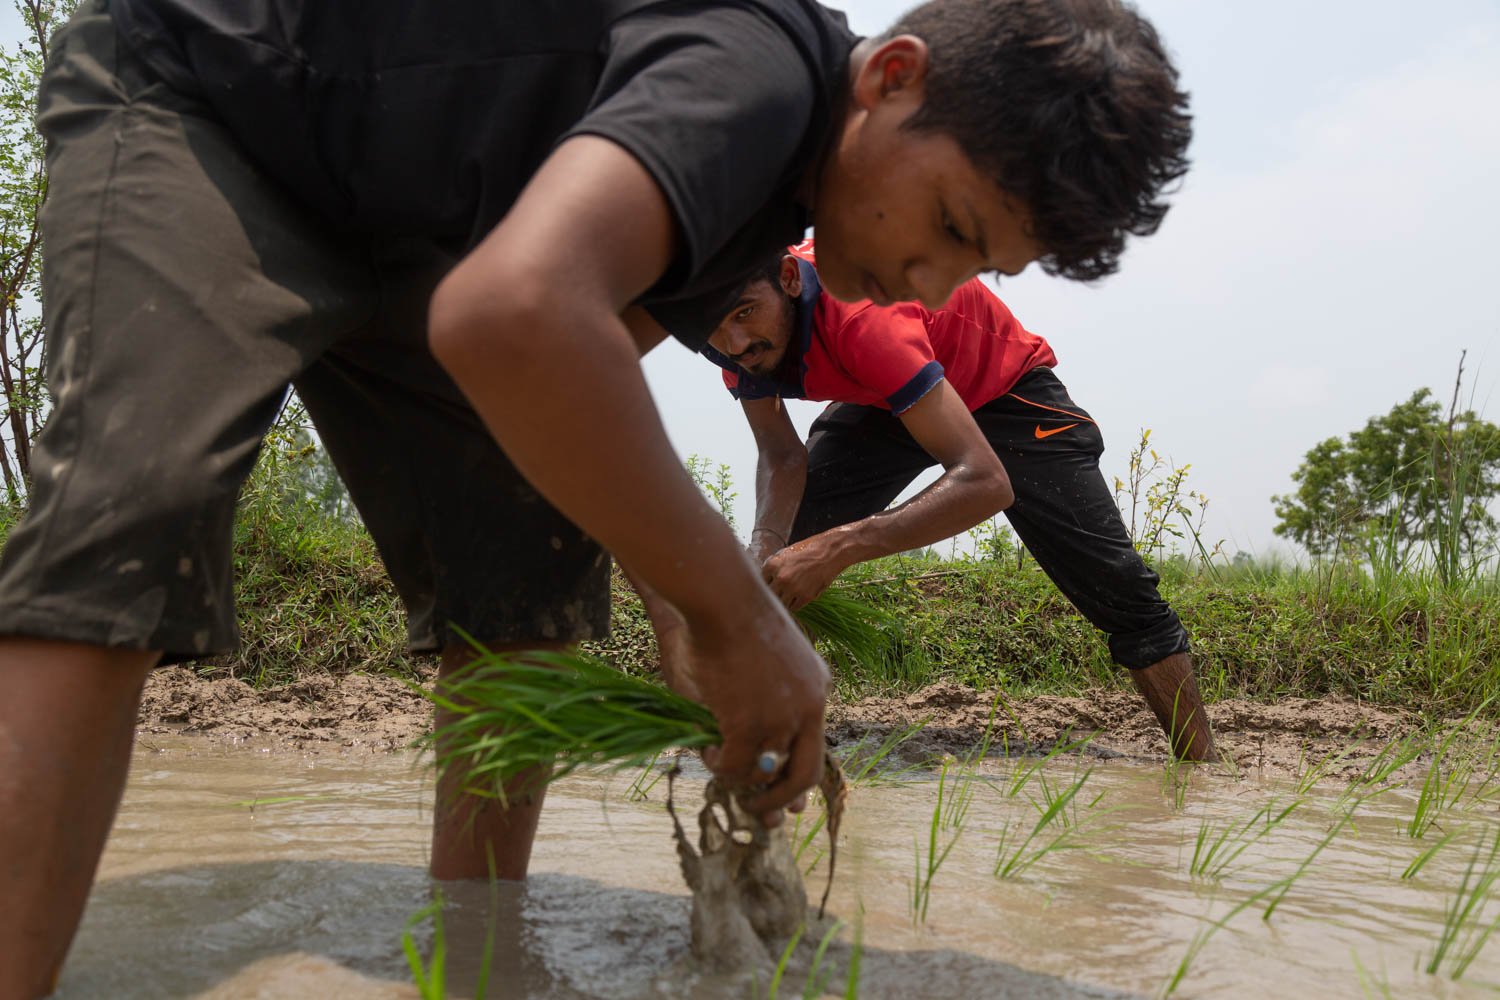  Indrajit Mandal, 22, works his family rice field in the village of Nagrain 9, in the Ghodhas District outside of Janakpur, Nepal on July 1, 2022. 